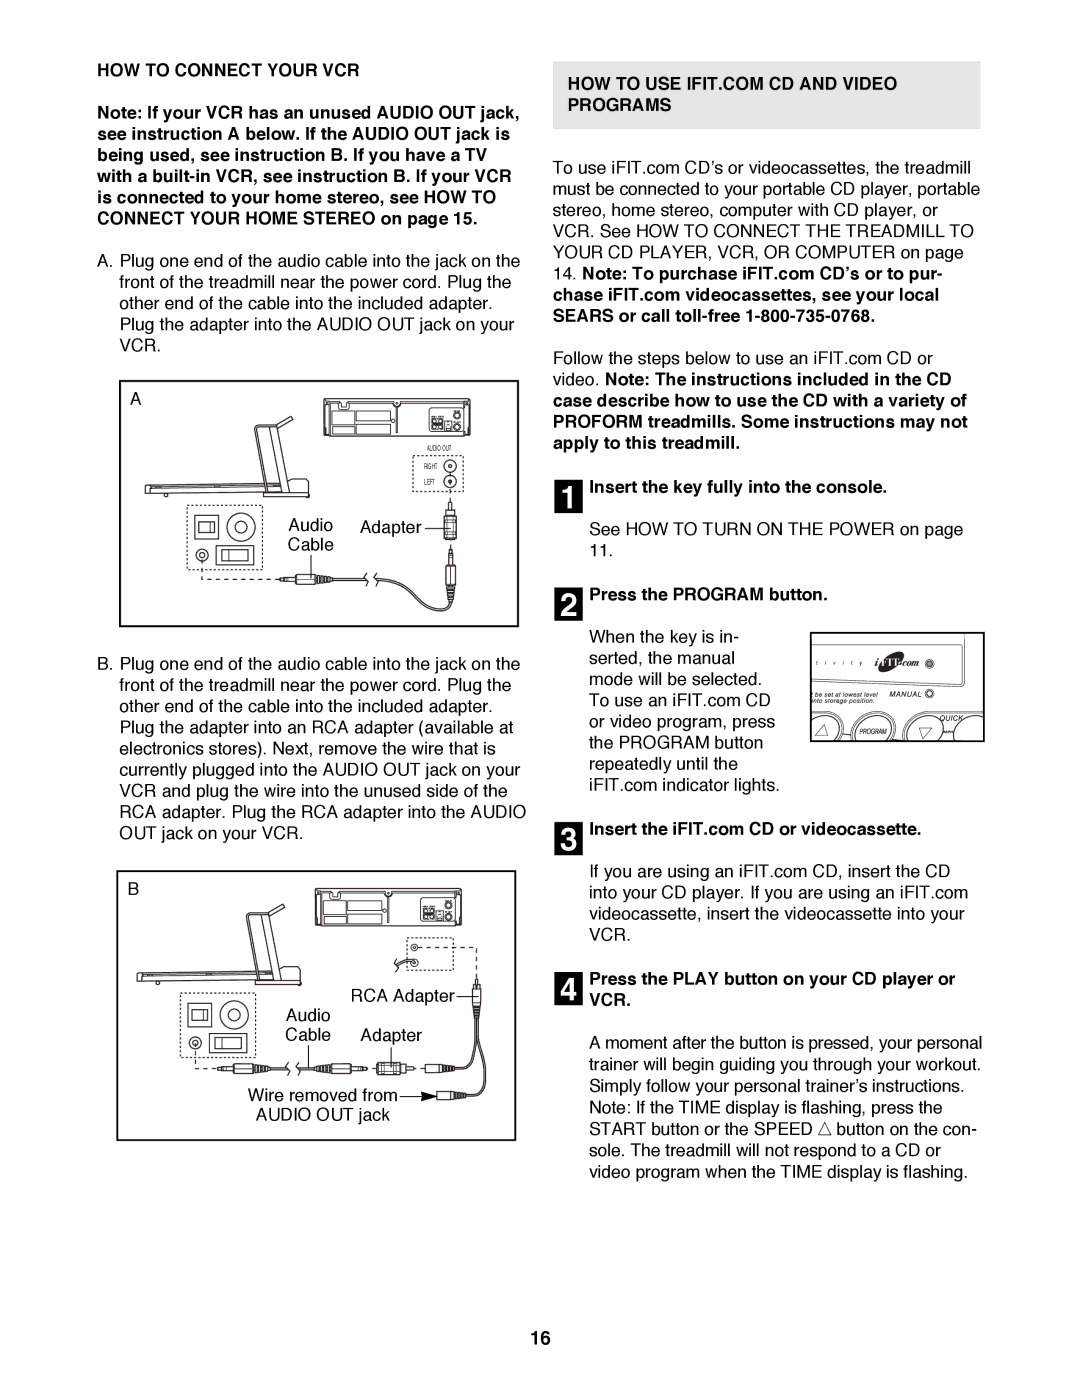 ProForm 831.299481 user manual HOW to Connect Your VCR, Audio Adapter Cable 